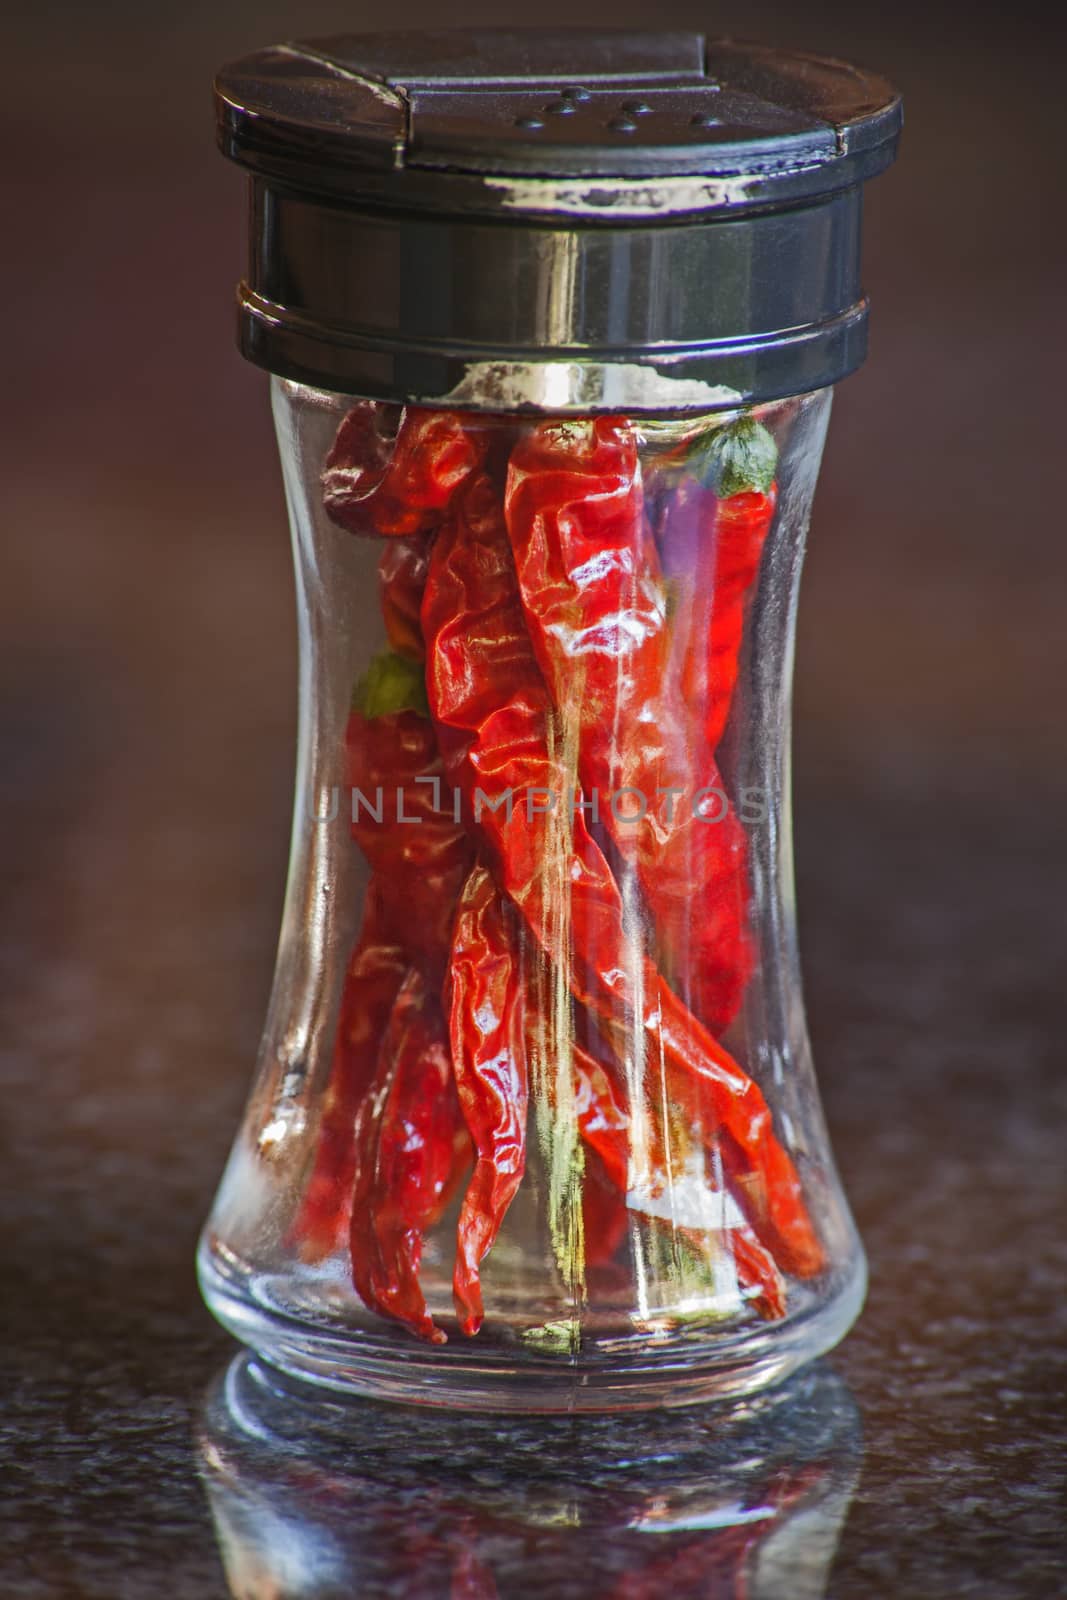 A spice bottle with dried red hot chili 6493 by kobus_peche